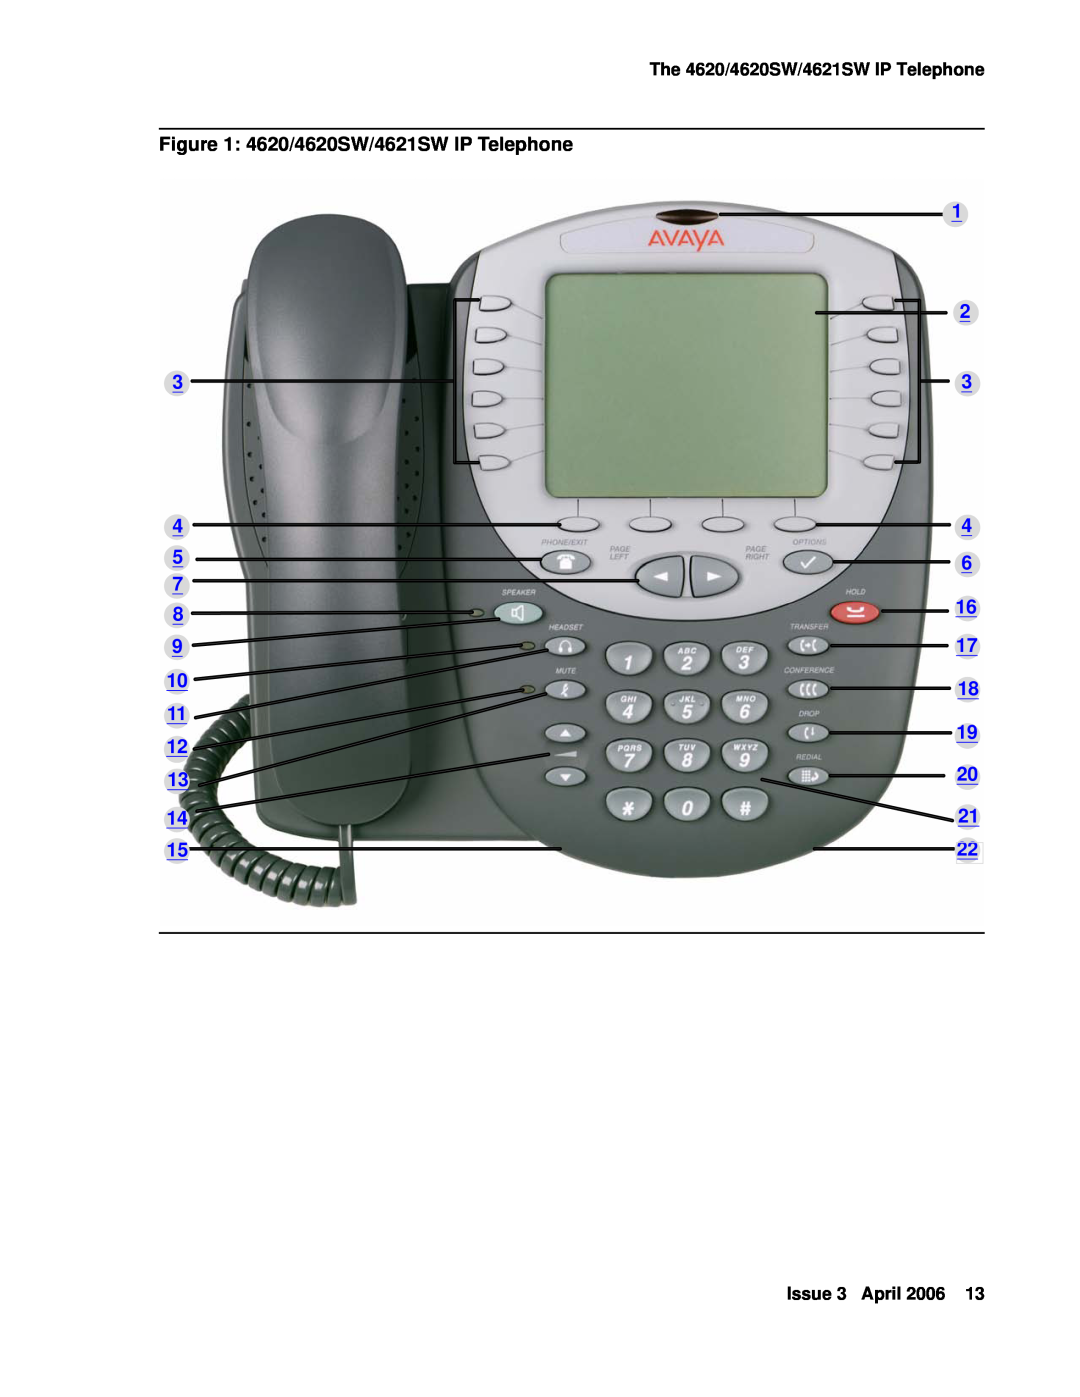 Avaya manual The 4620/4620SW/4621SW IP Telephone, Issue 3 April 2006 